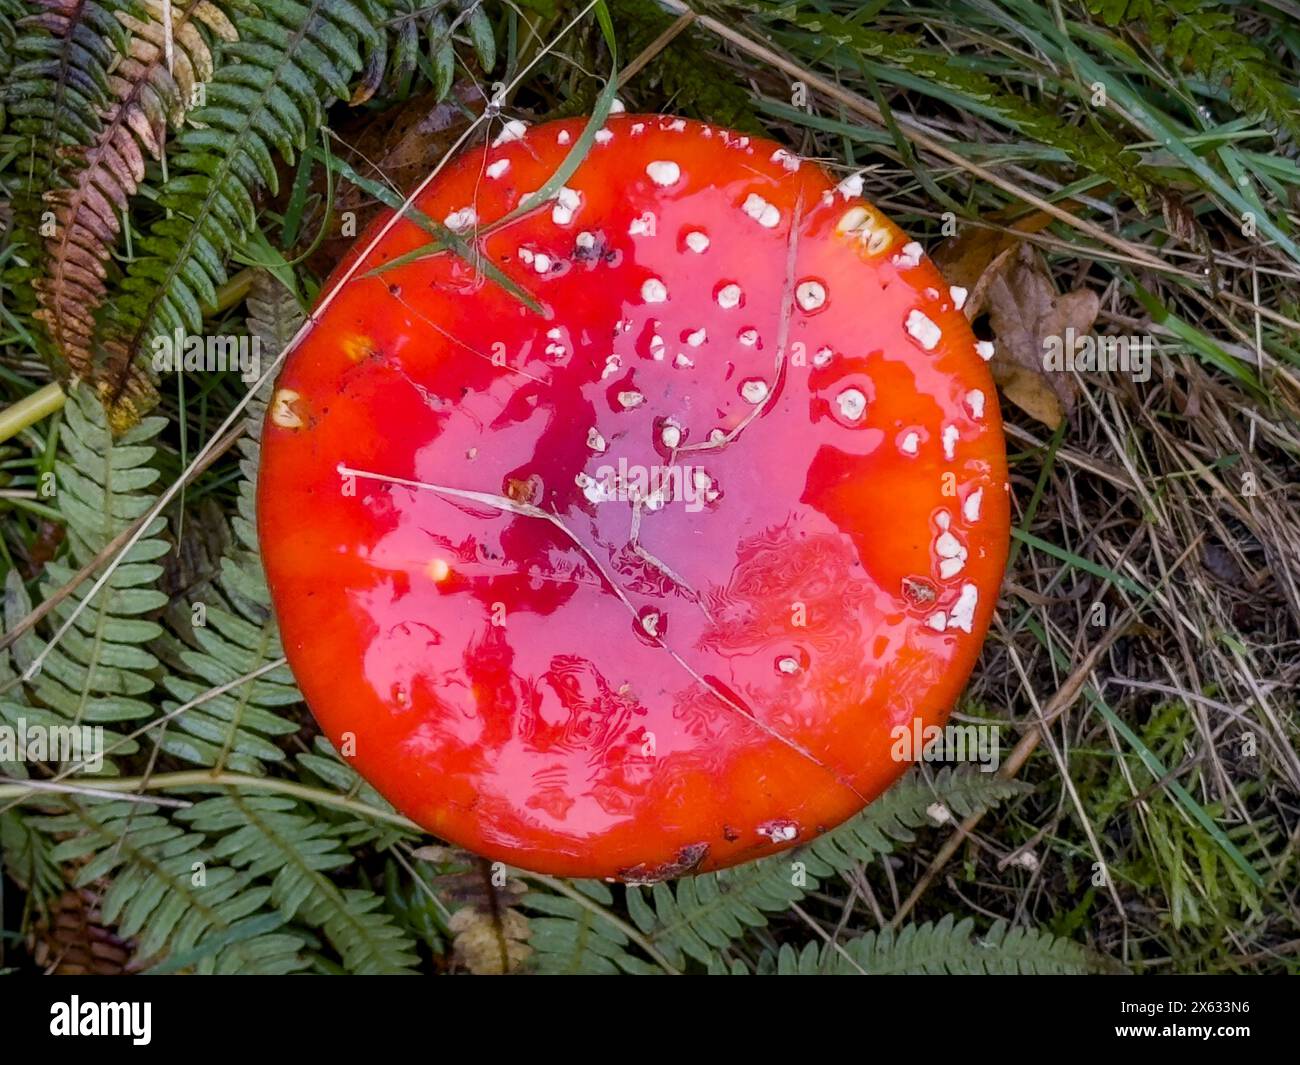 Amanita muscaria, commonly known as the fly agaric or fly amanita growing in a patch of grass. Stock Photo